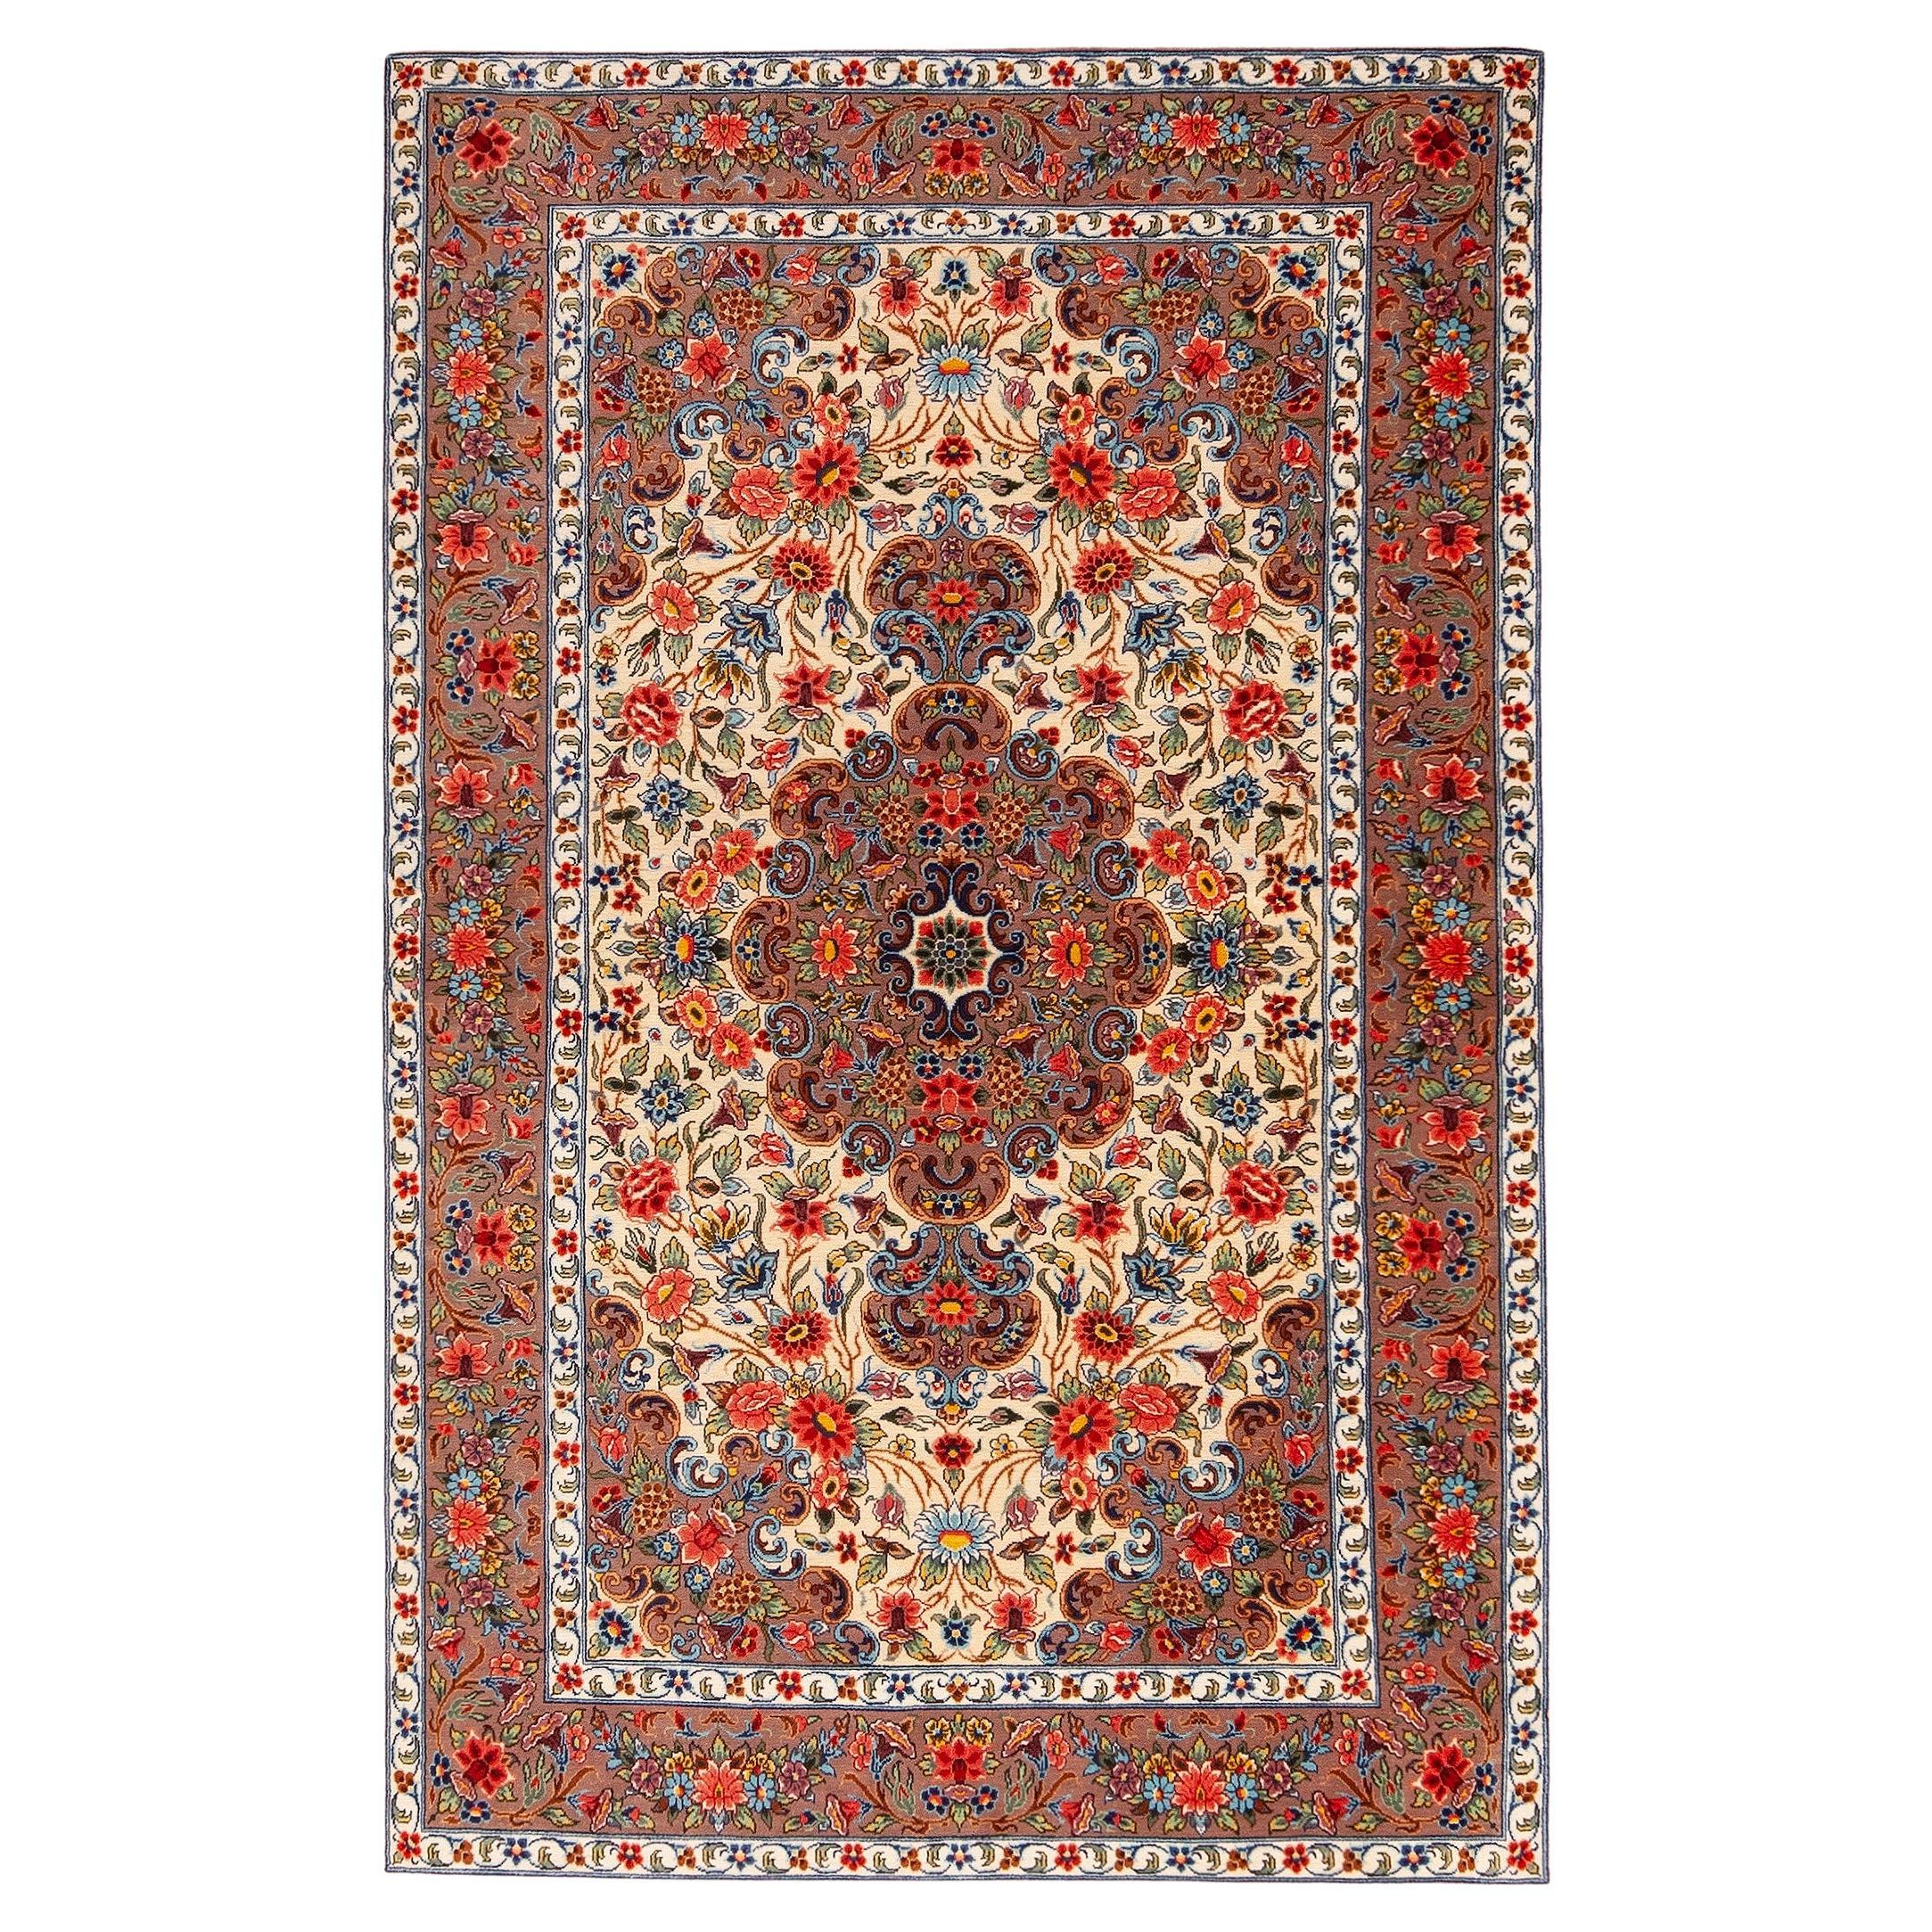 Small Fine Floral Design Vintage Luxurious Persian Silk Qum Rug 2'8" x 4' For Sale